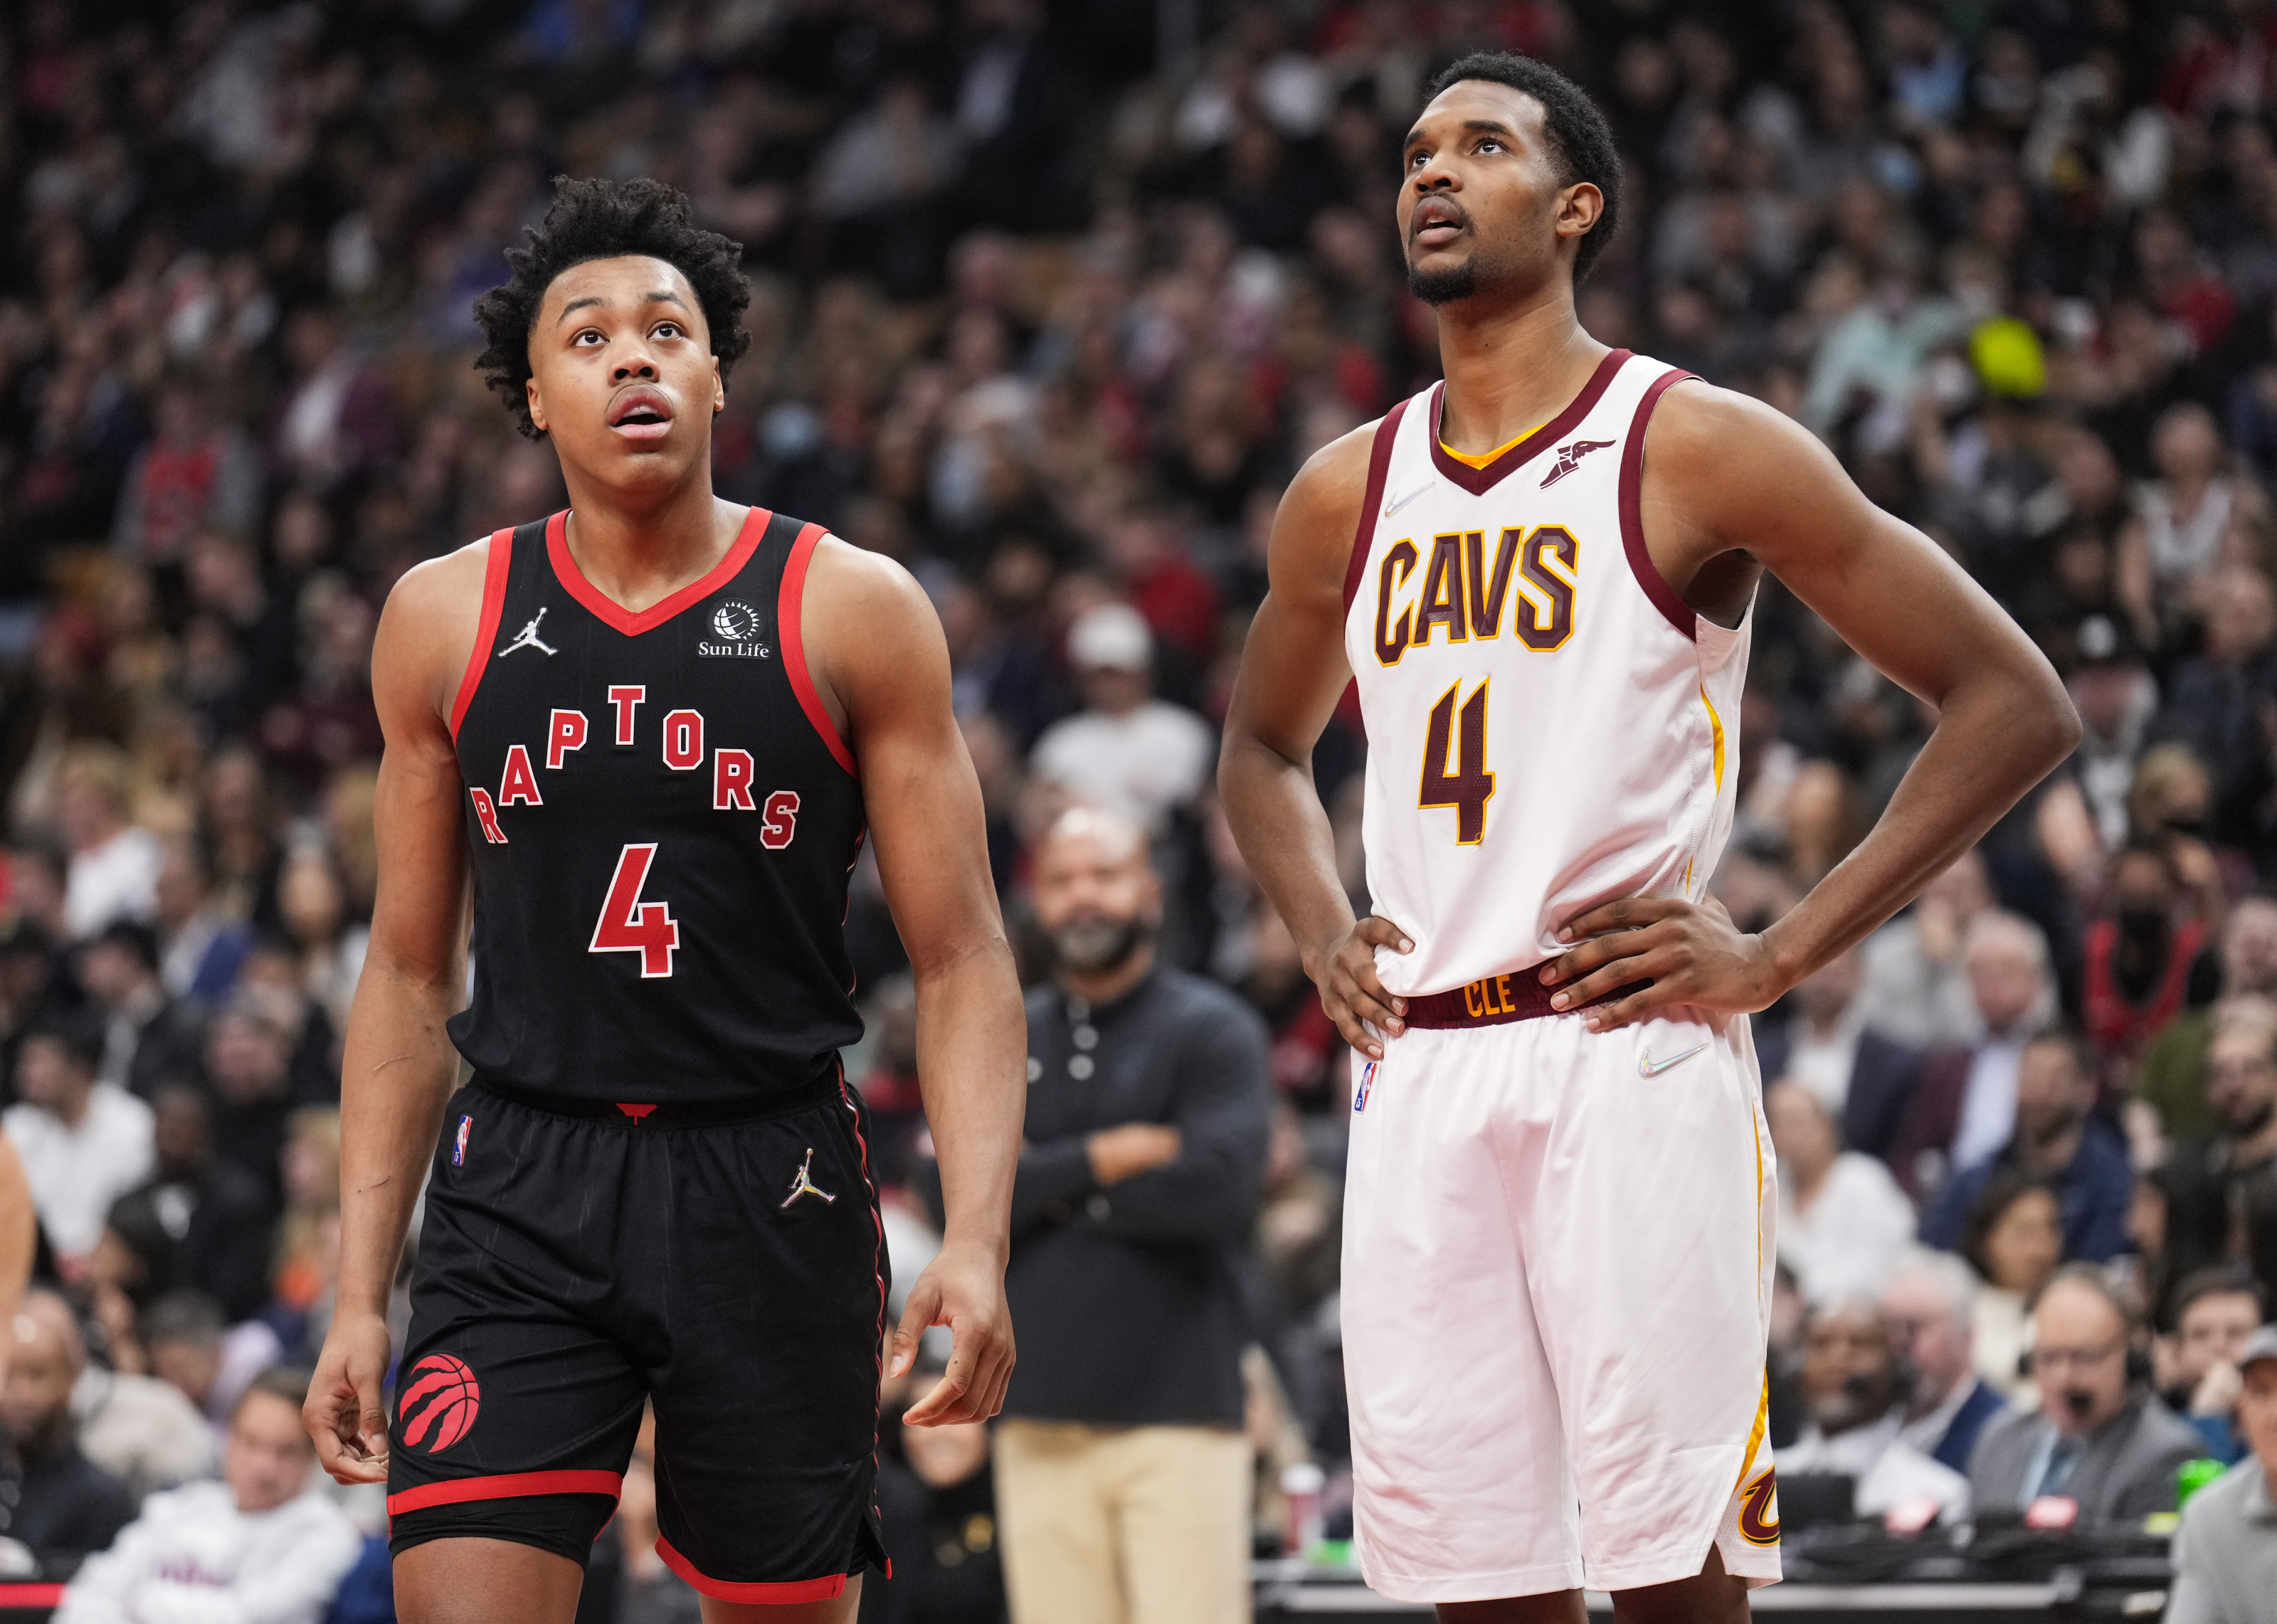 Raptors' Barnes wins NBA Rookie of the Year, edging Mobley - WHYY